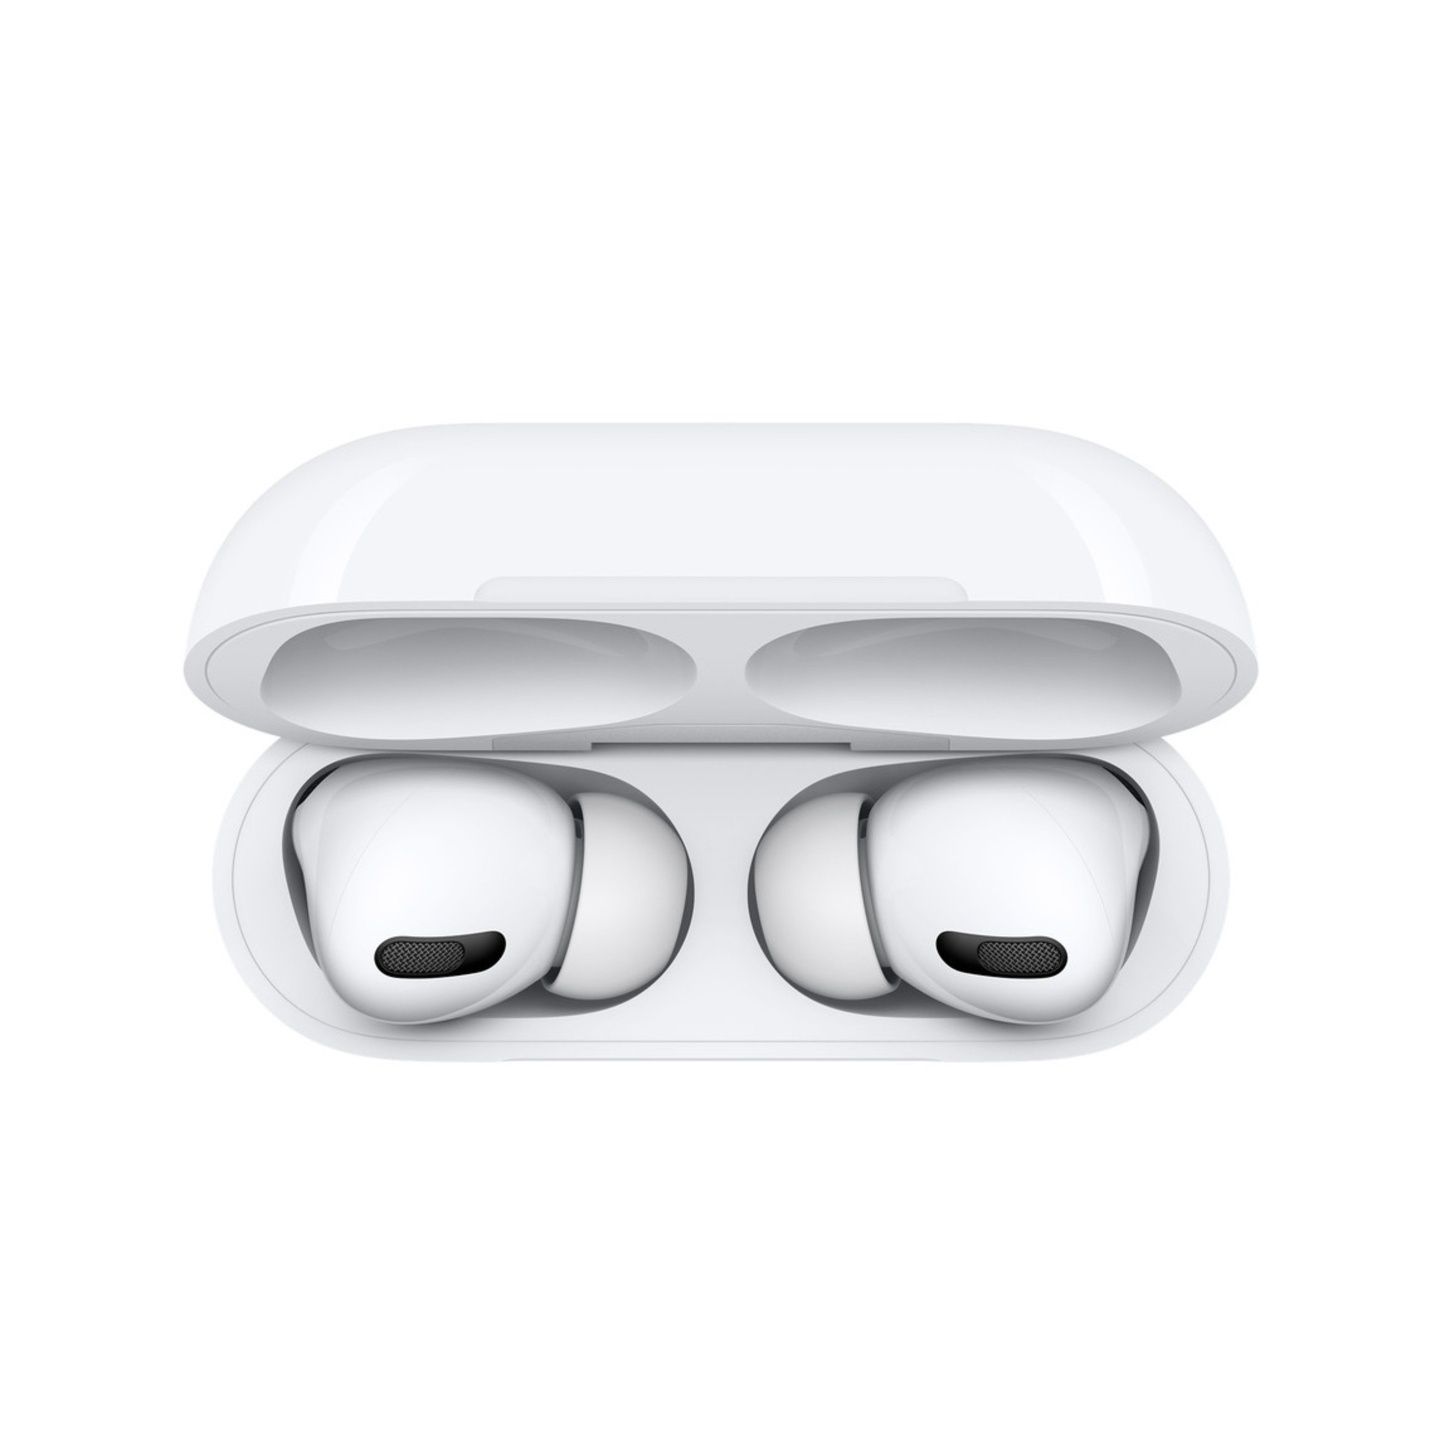 AirPods pro. AirPods Max. AirPods premium. AirPods 3.Эйрподс